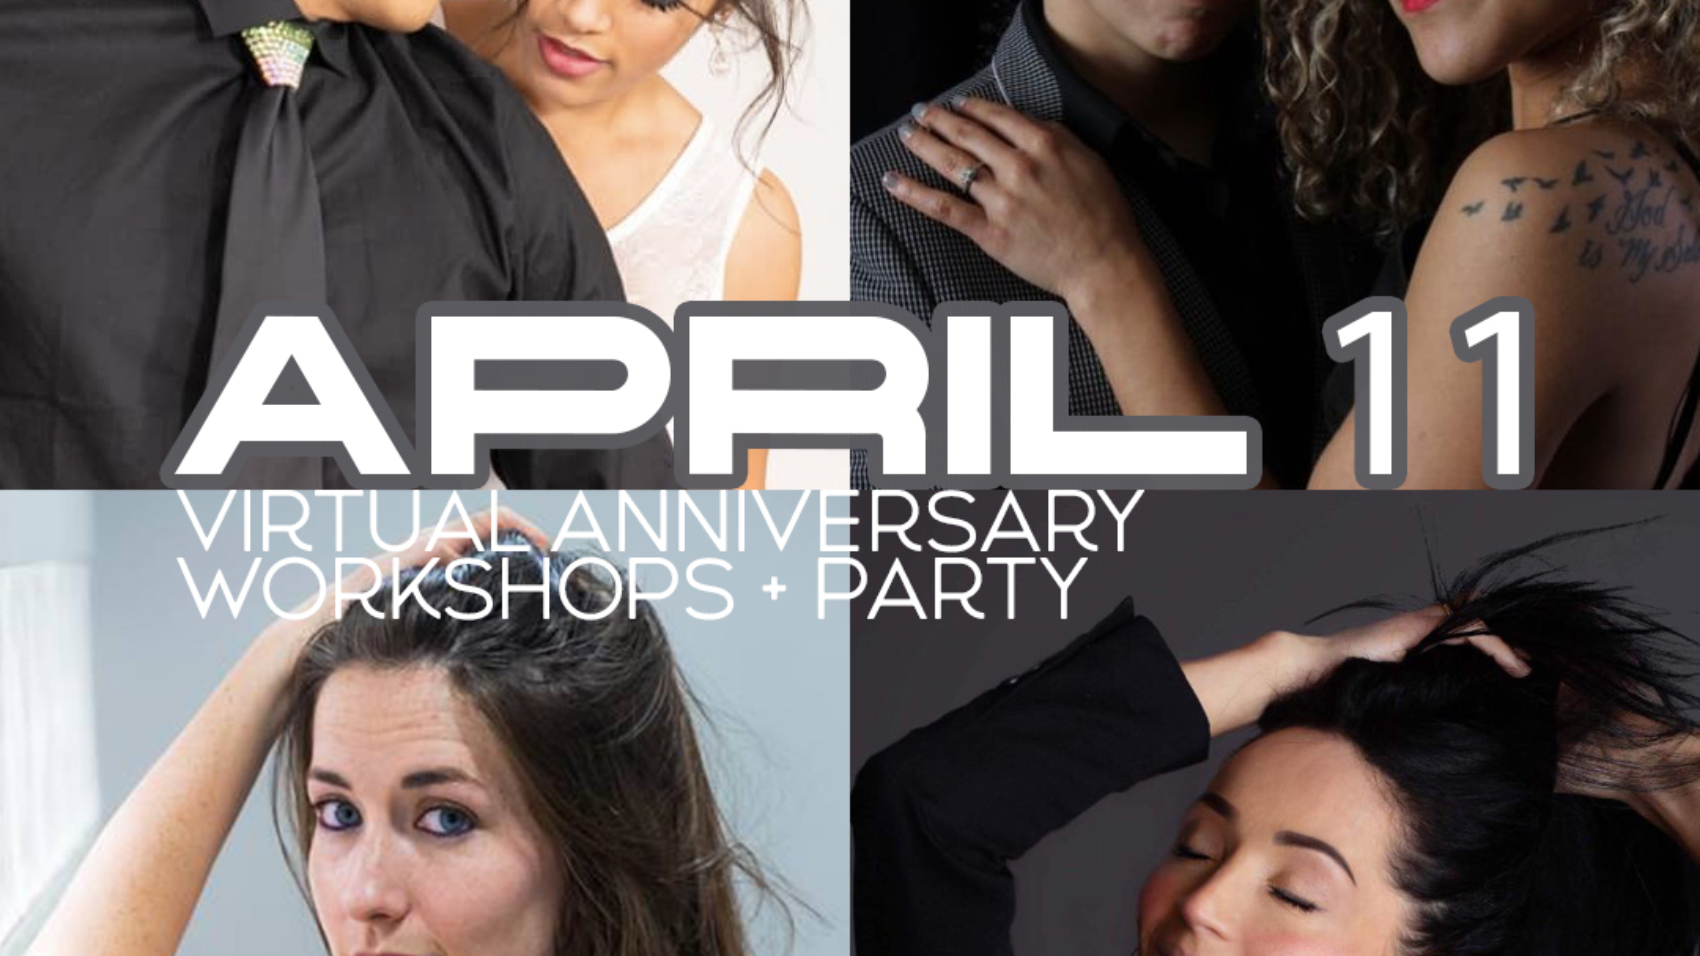 Live online salsa and bachata workshops and social party with Salsa With Silvia